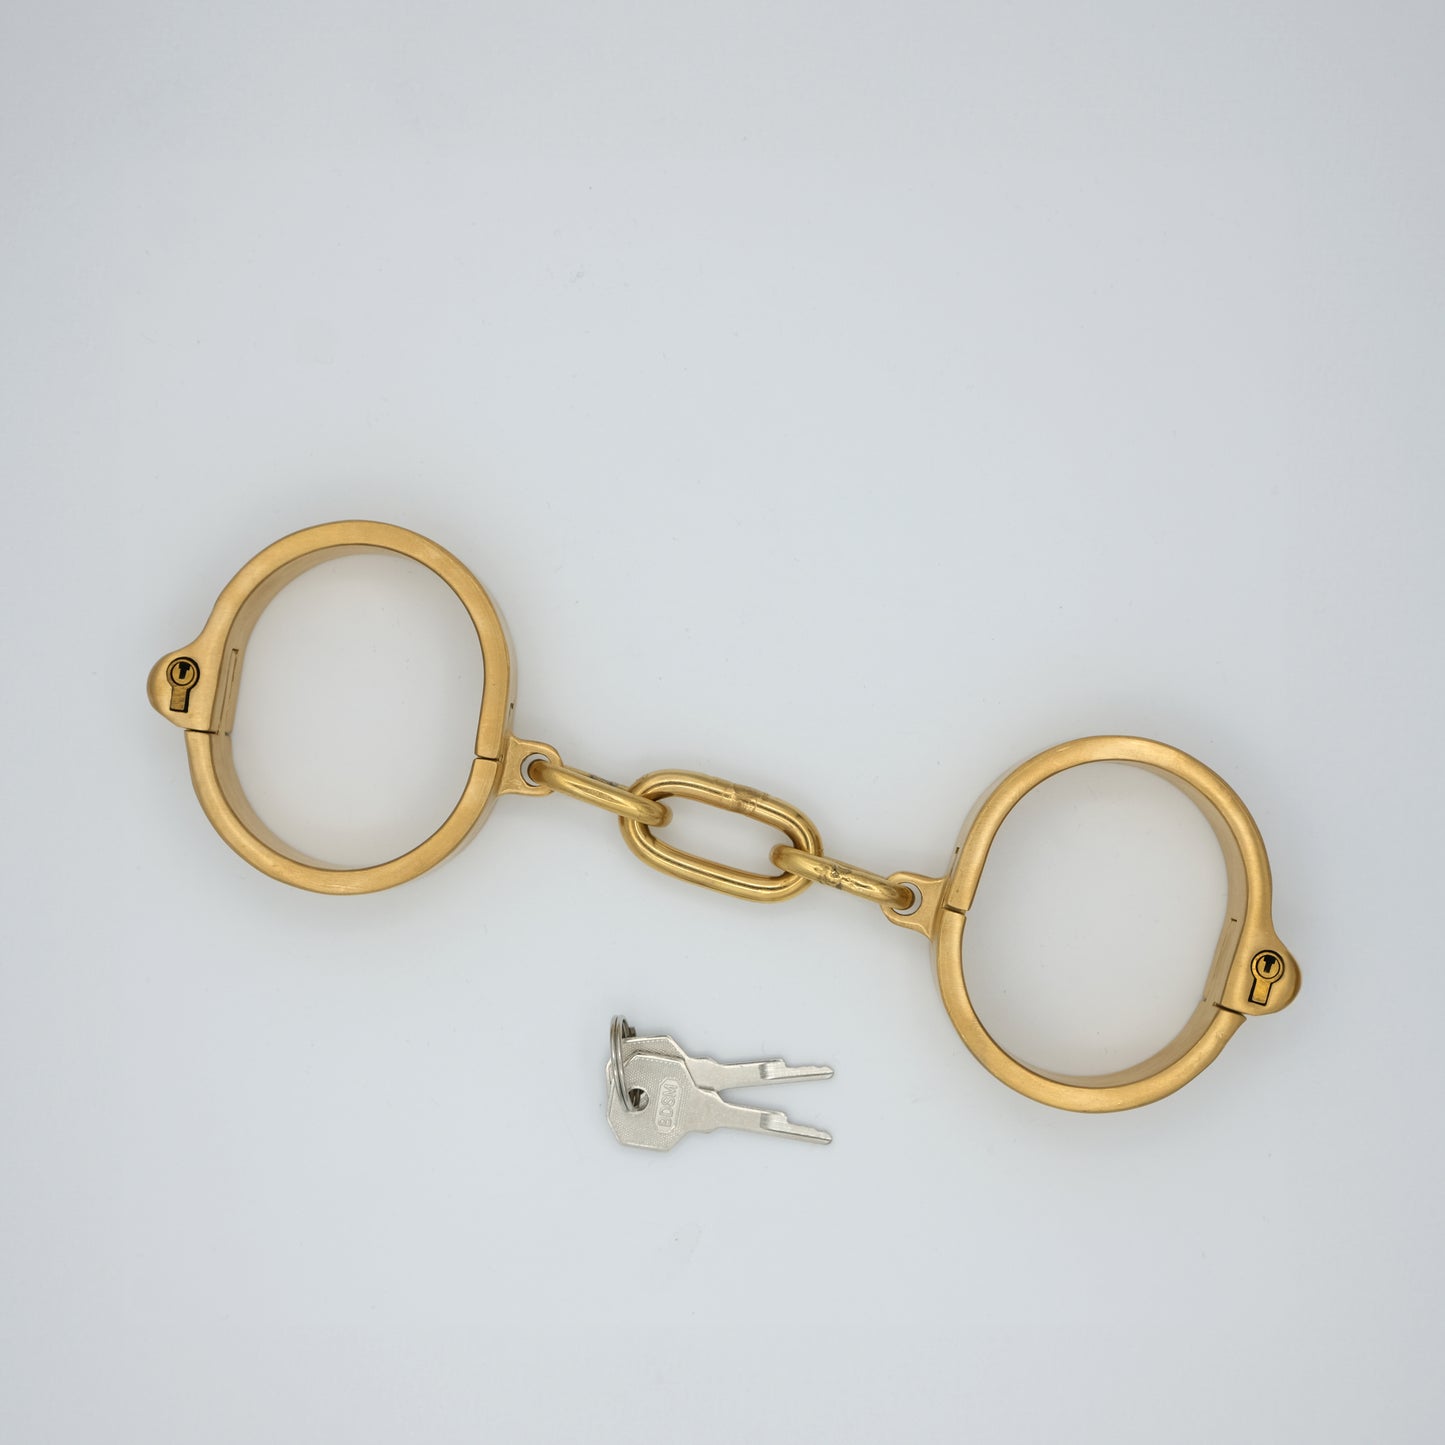 Solid stainless steel shackles with key lock and link